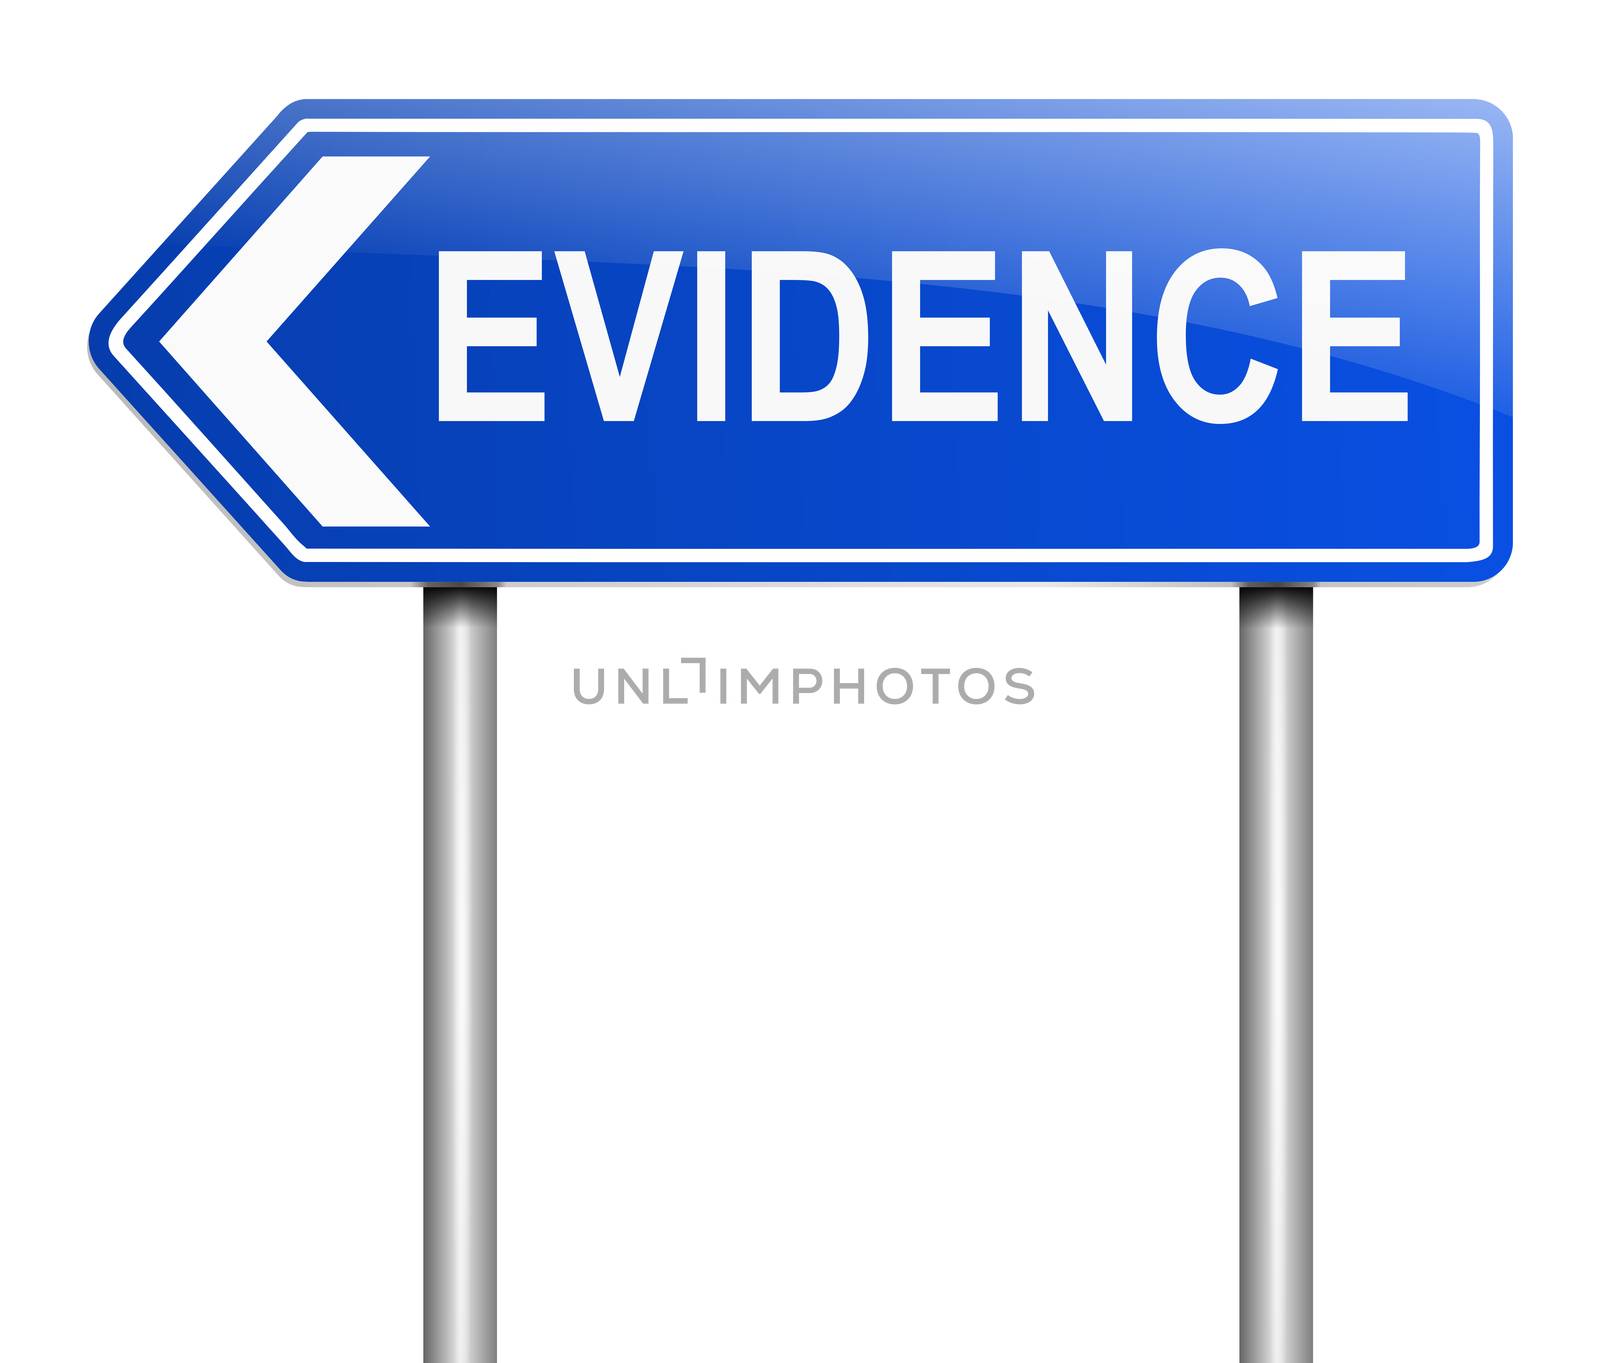 Illustration depicting a sign with an evidence concept.